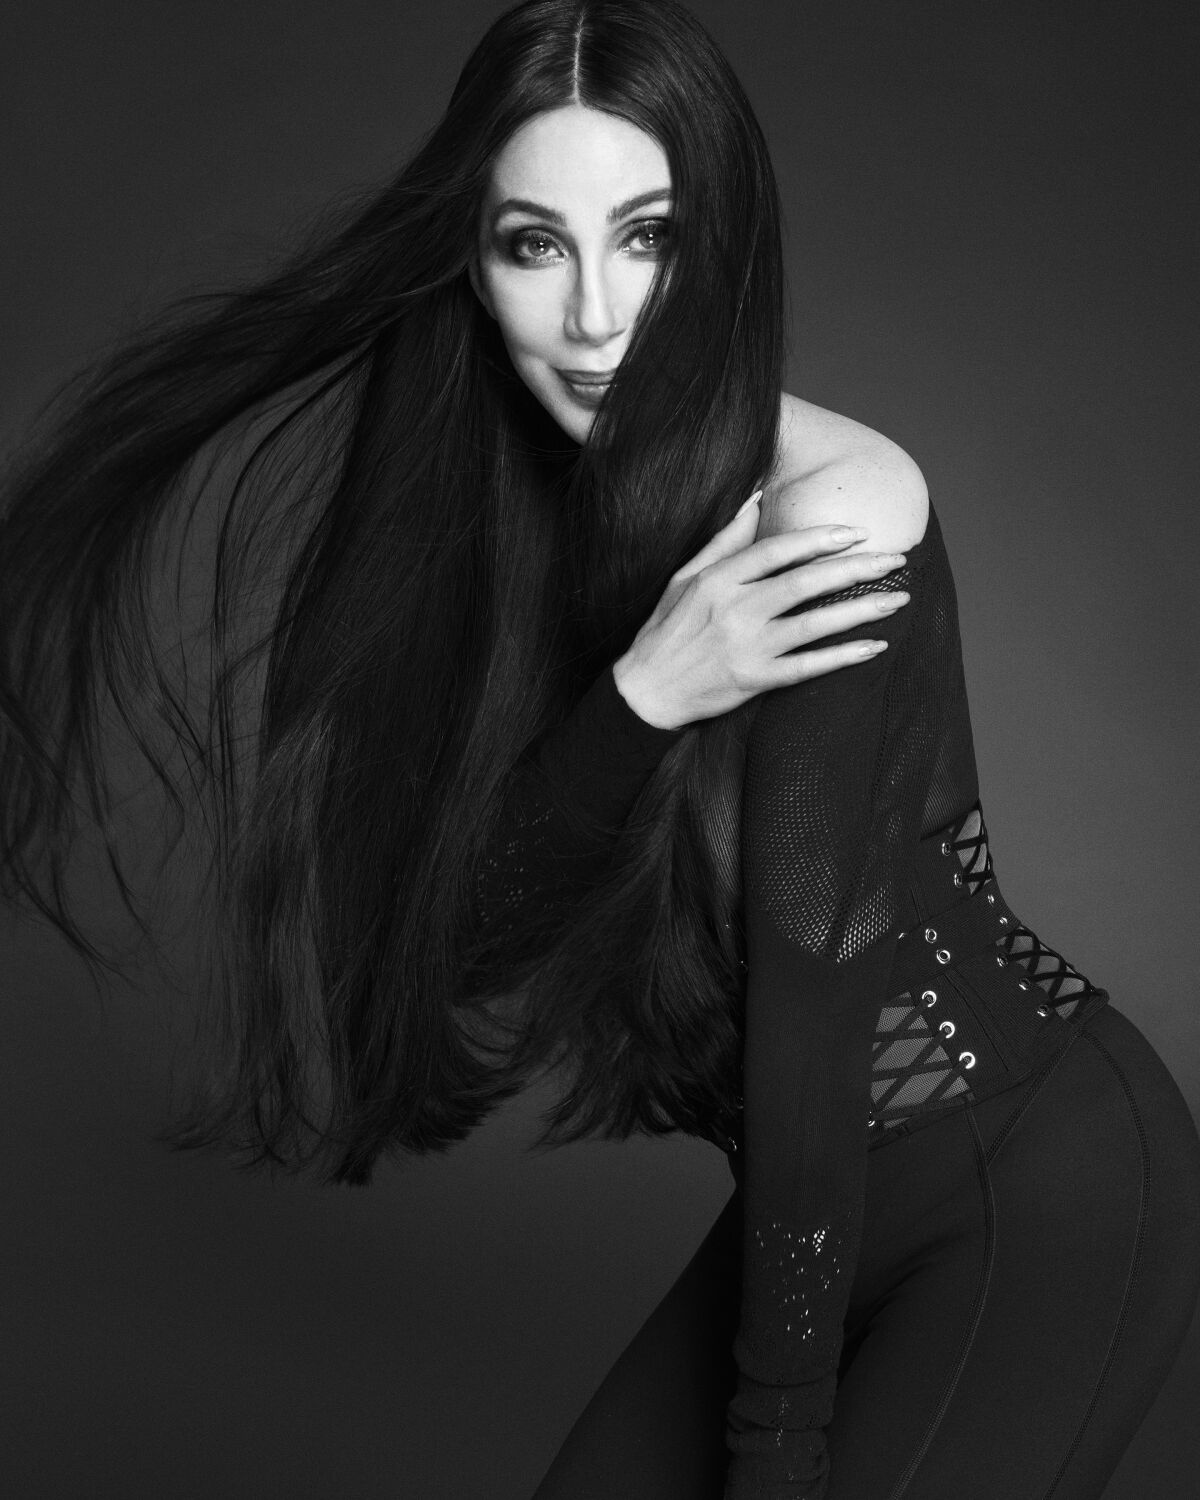 Cher was in the midst of a concert tour when the COVID-19 pandemic upended 2020.